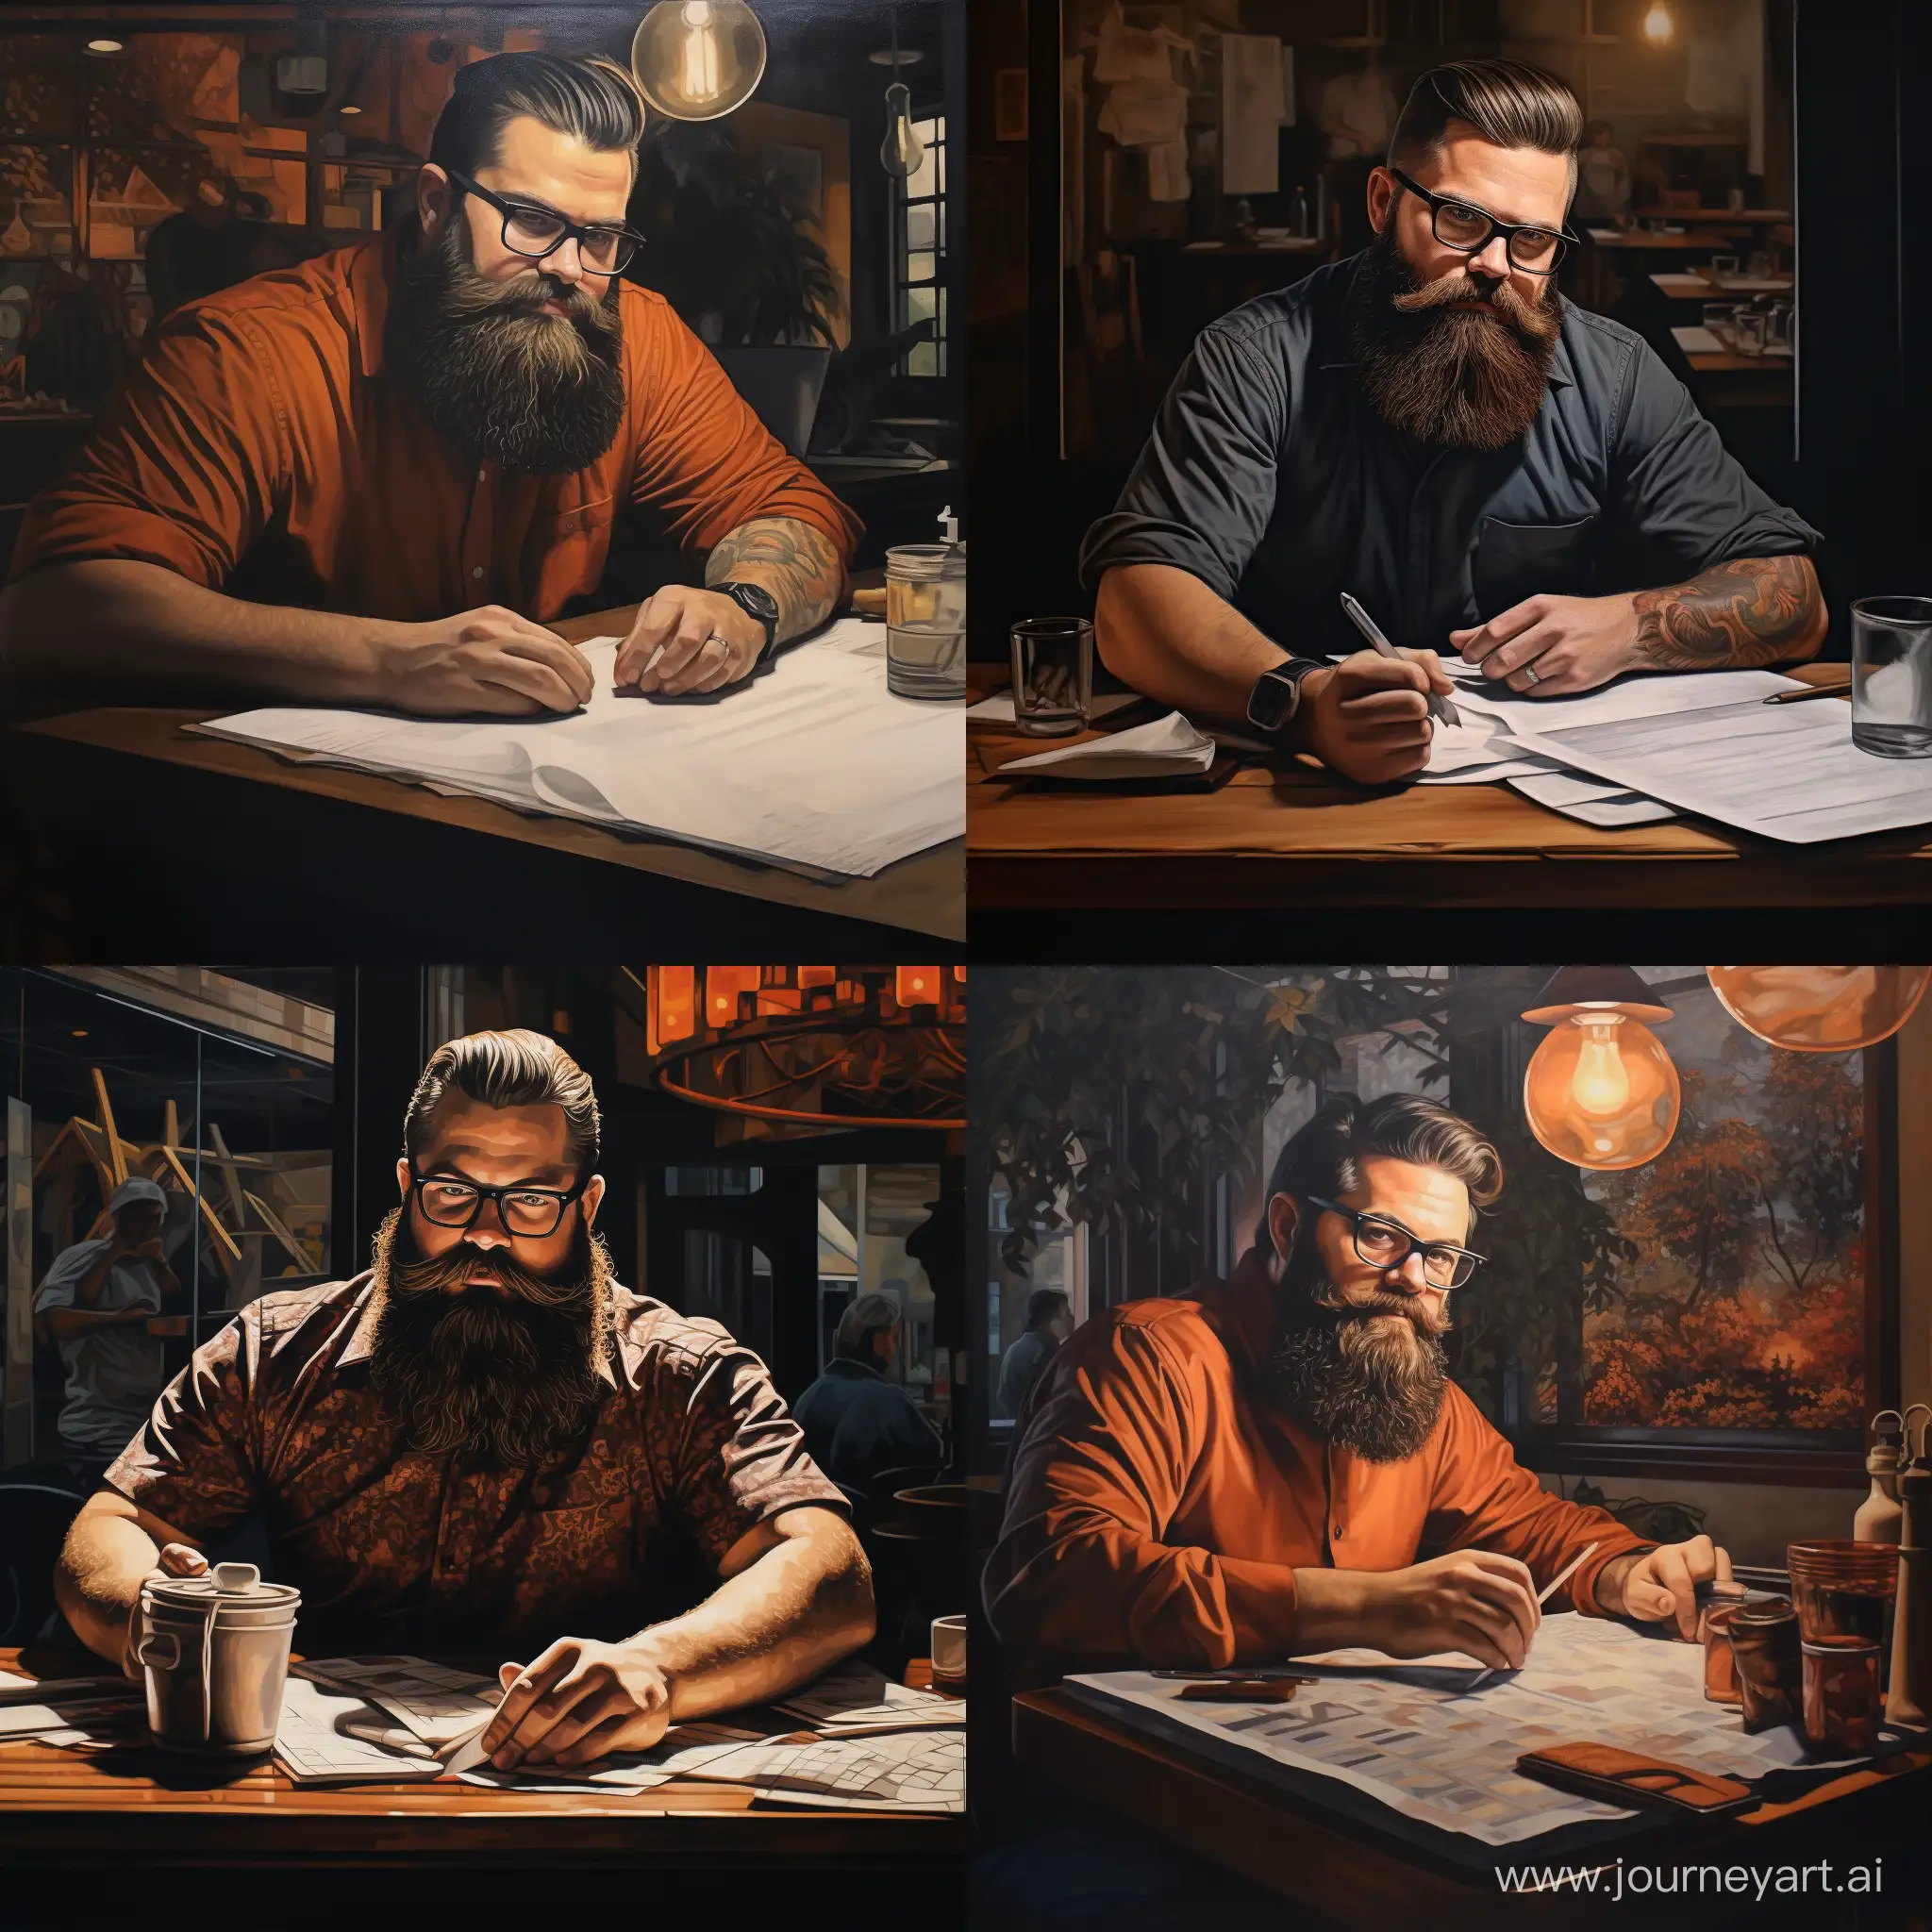 Bearded-Man-Working-with-Tables-Professional-Workspace-Image